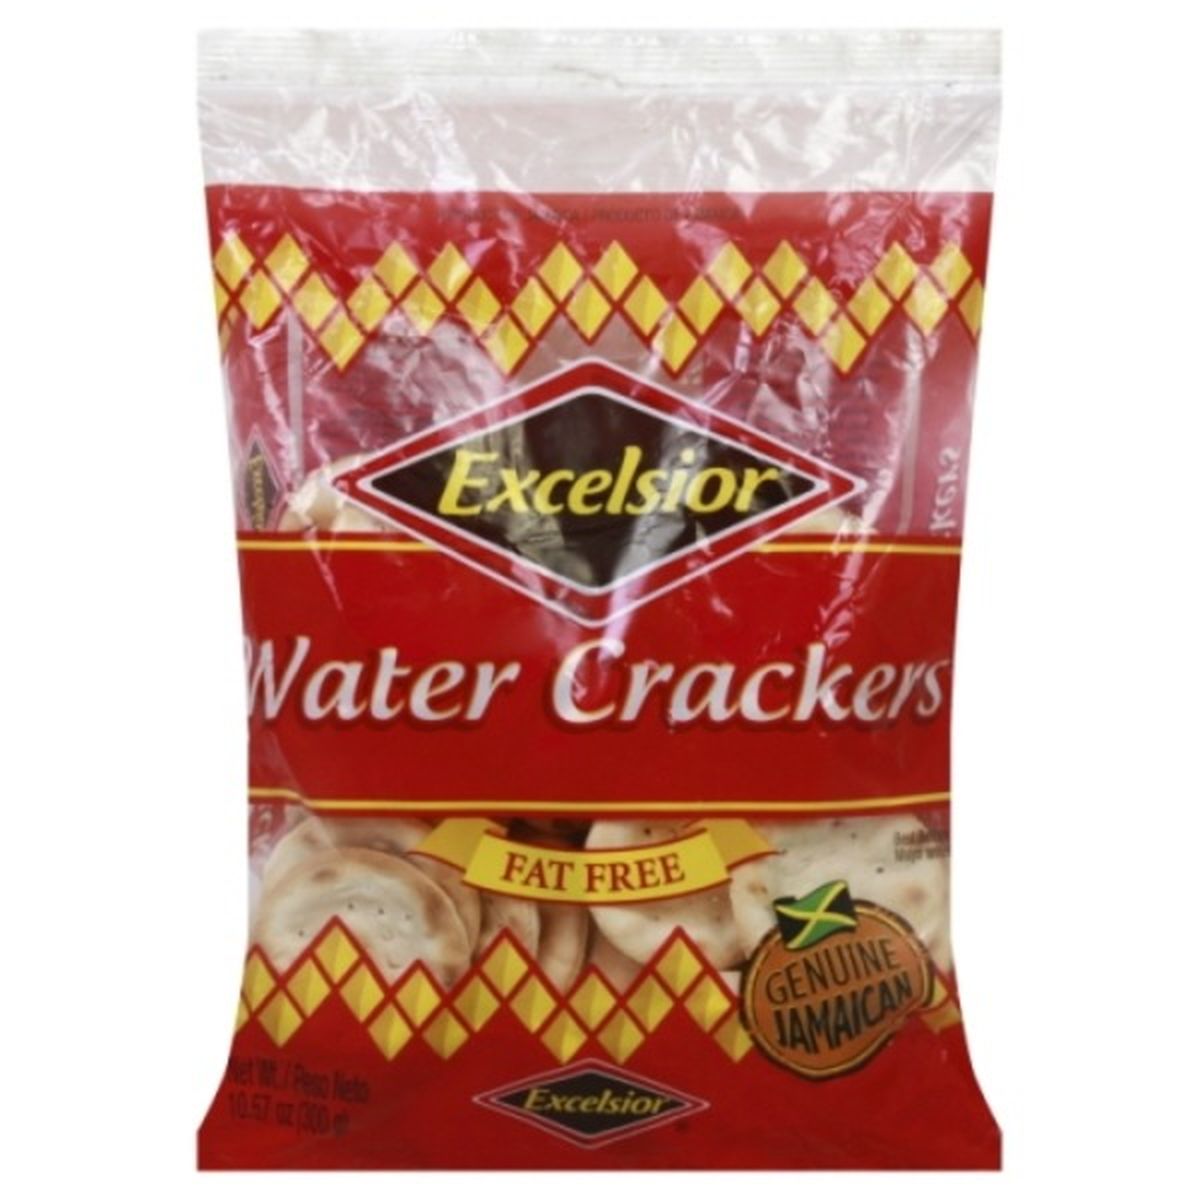 Calories in Excelsior Water Crackers, Fat Free